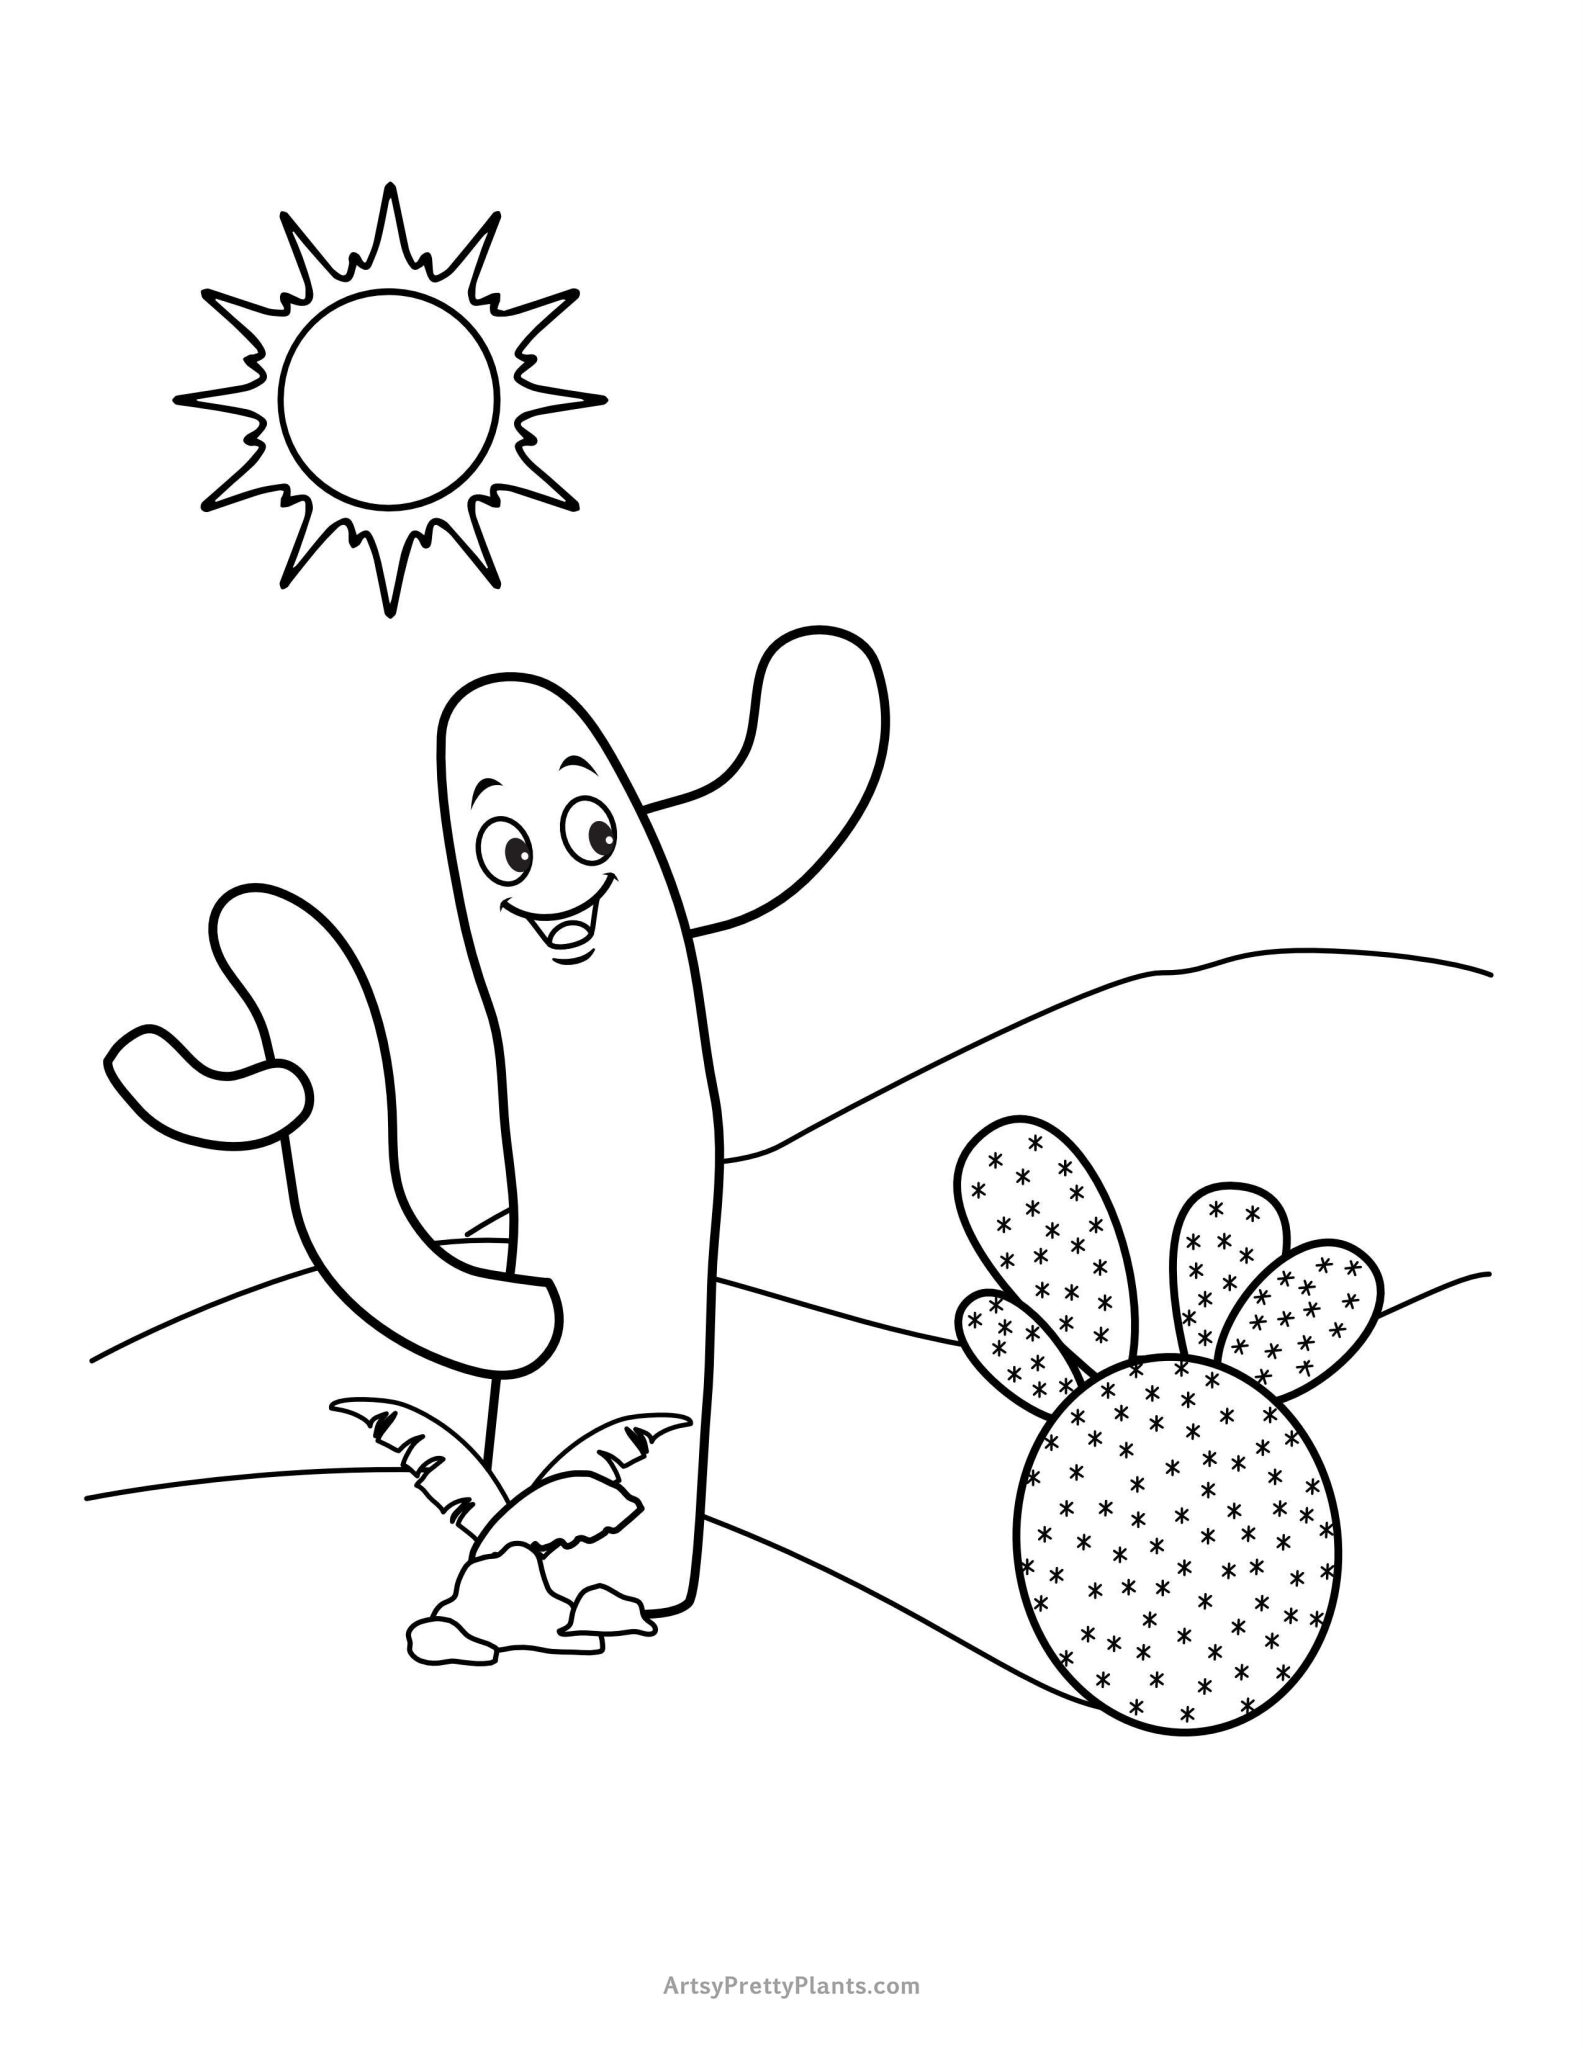 27-free-cactus-coloring-pages-printable-pdfs-artsy-pretty-plants